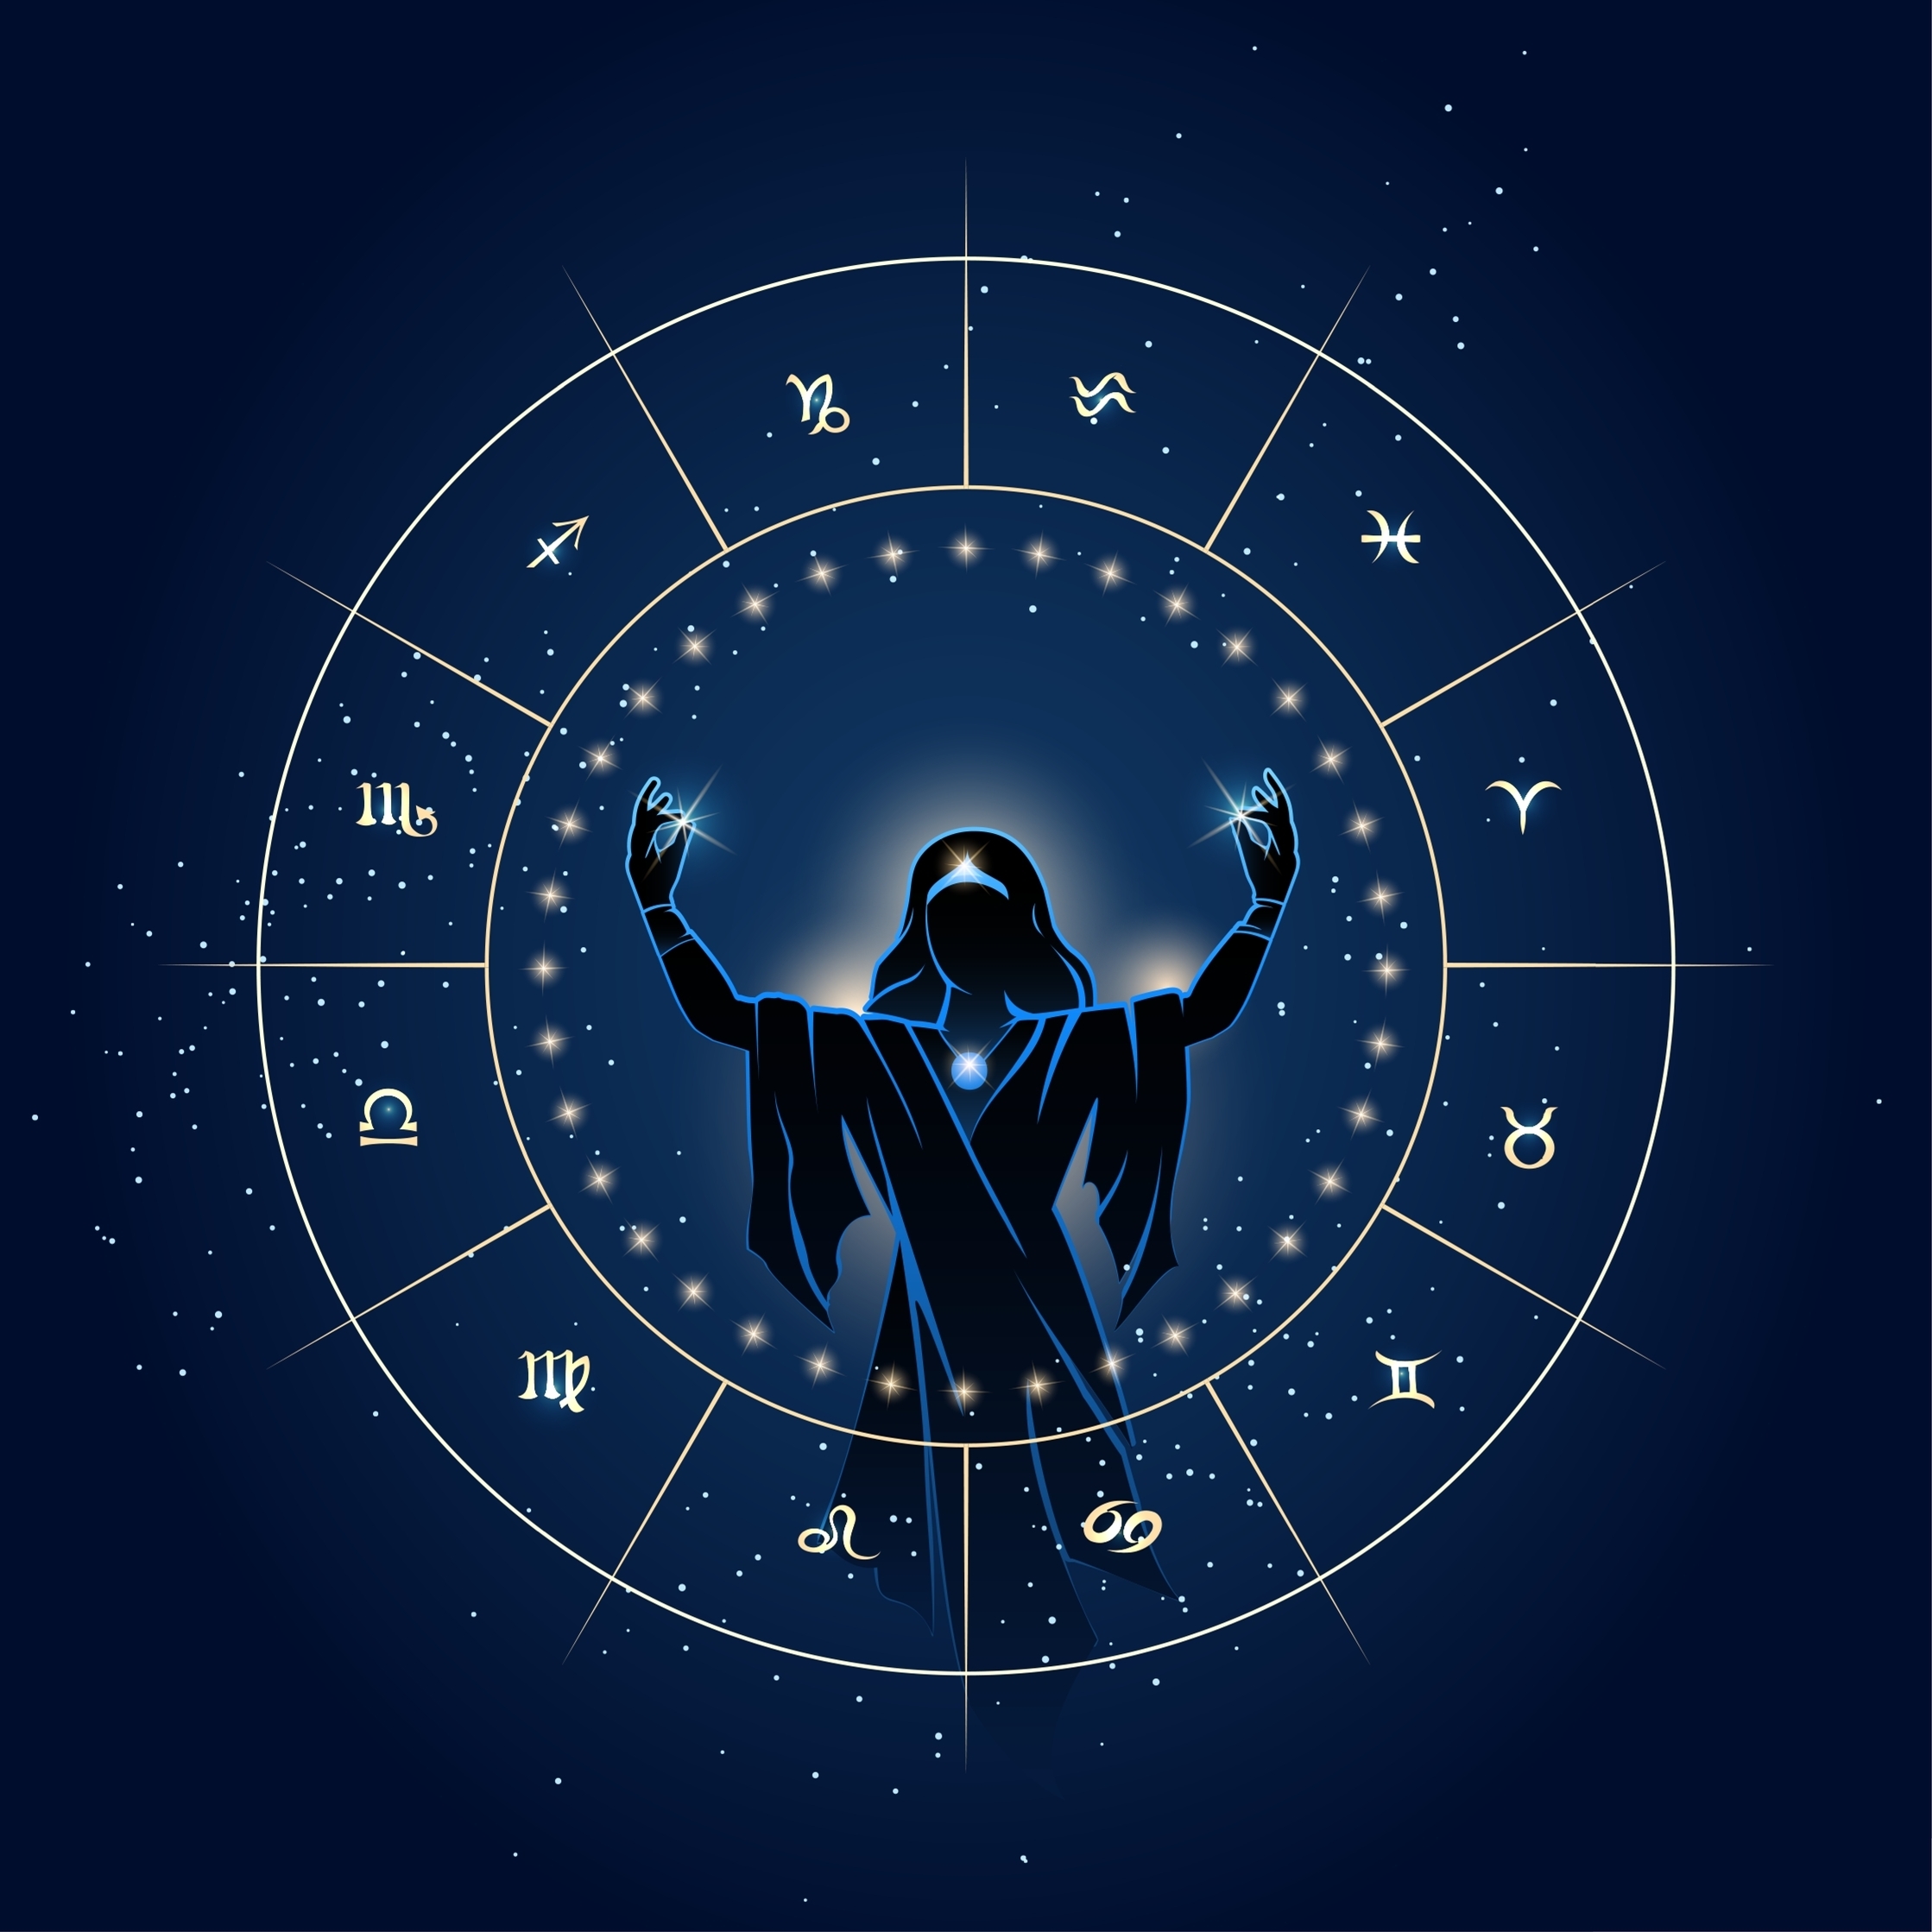 An illustration of the Zodiac chart with a Goddess holding two stars standing in the middle | Source: Shutterstock